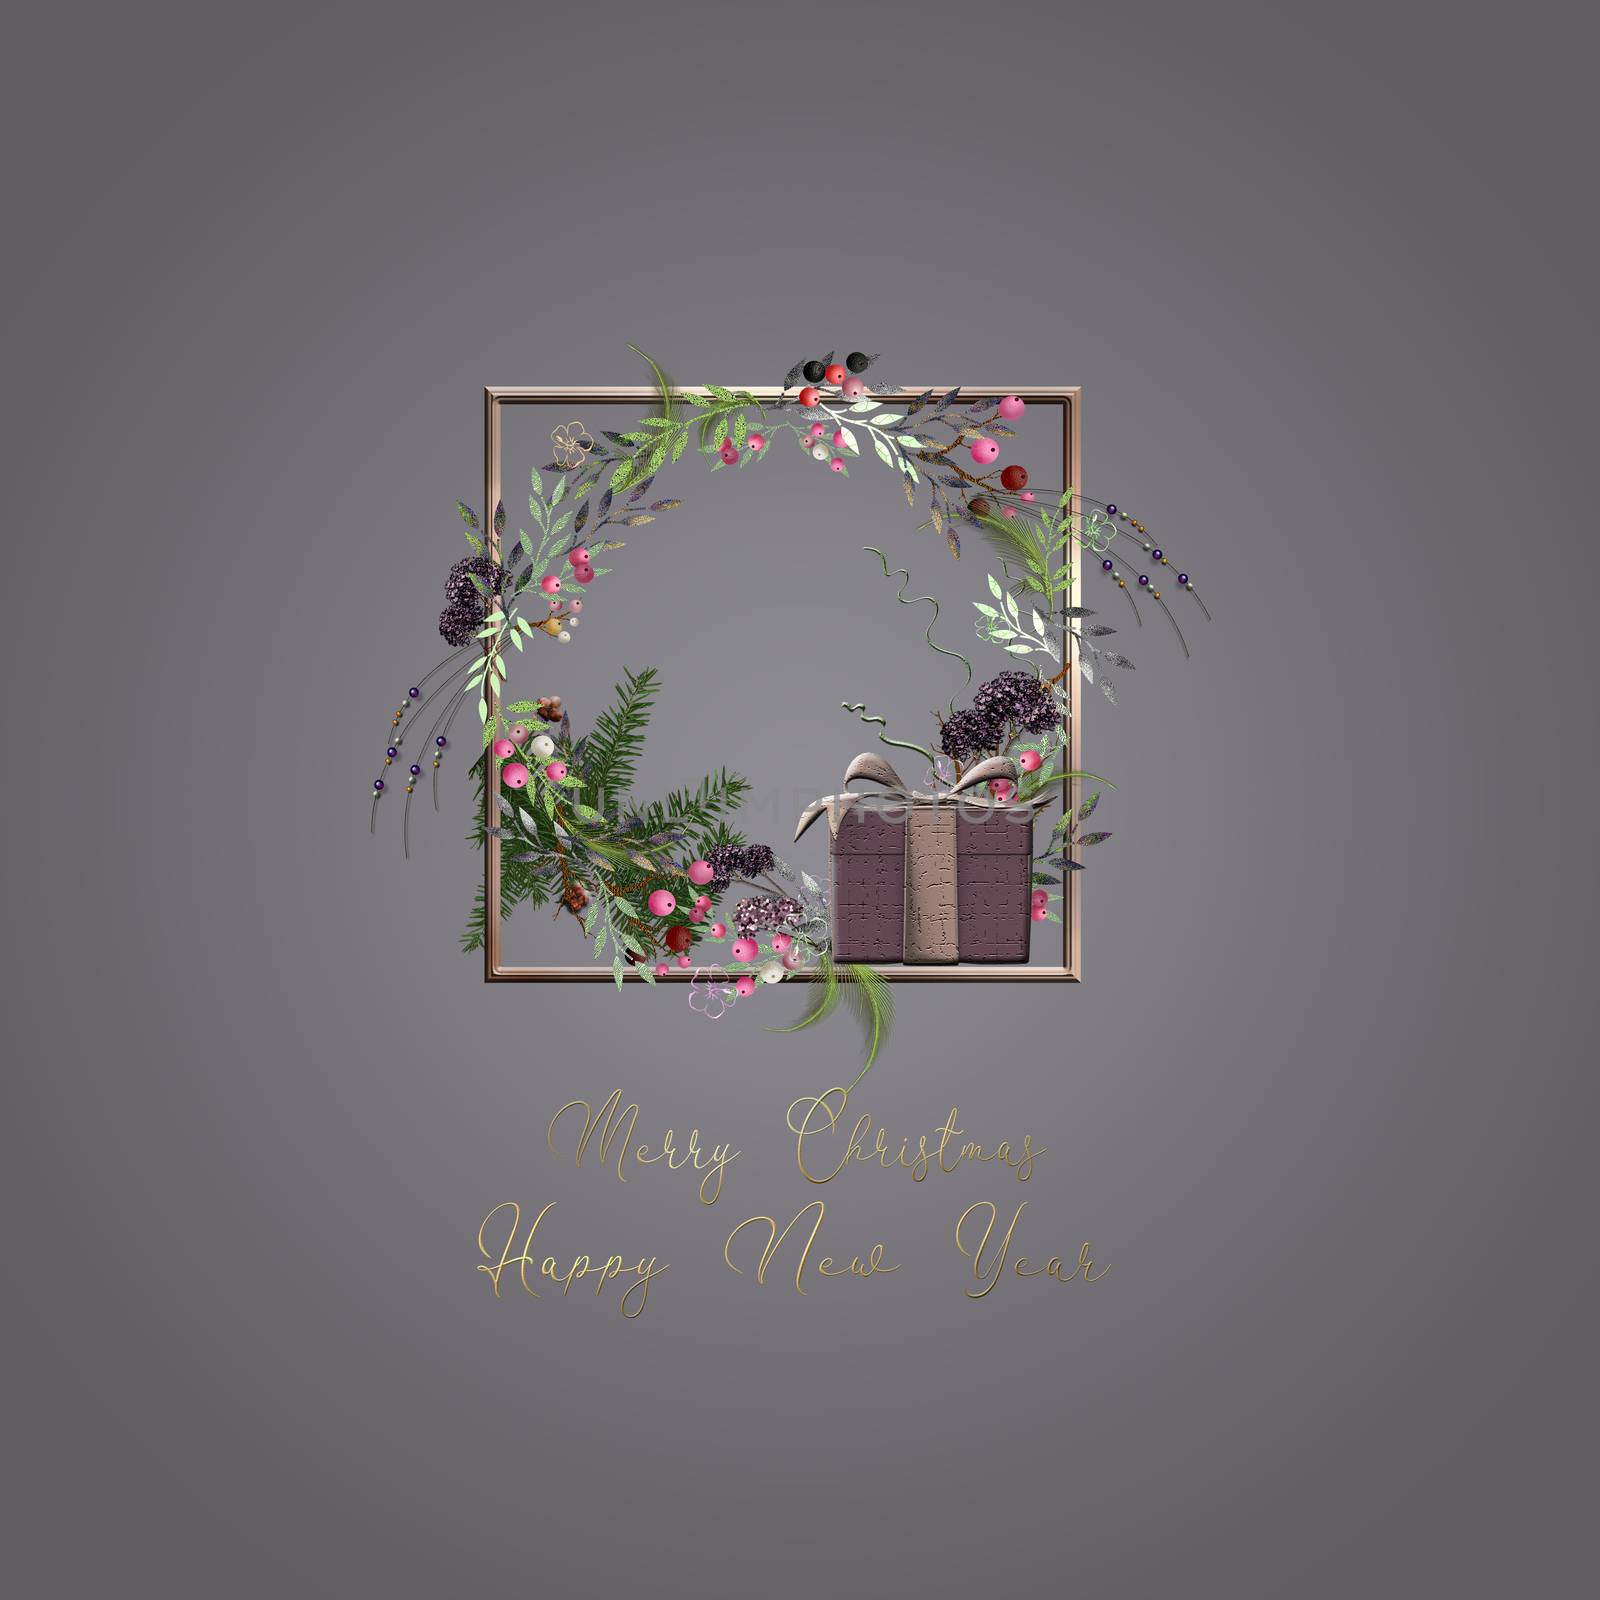 Merry Christmas Happy New Year design with wreath by NelliPolk